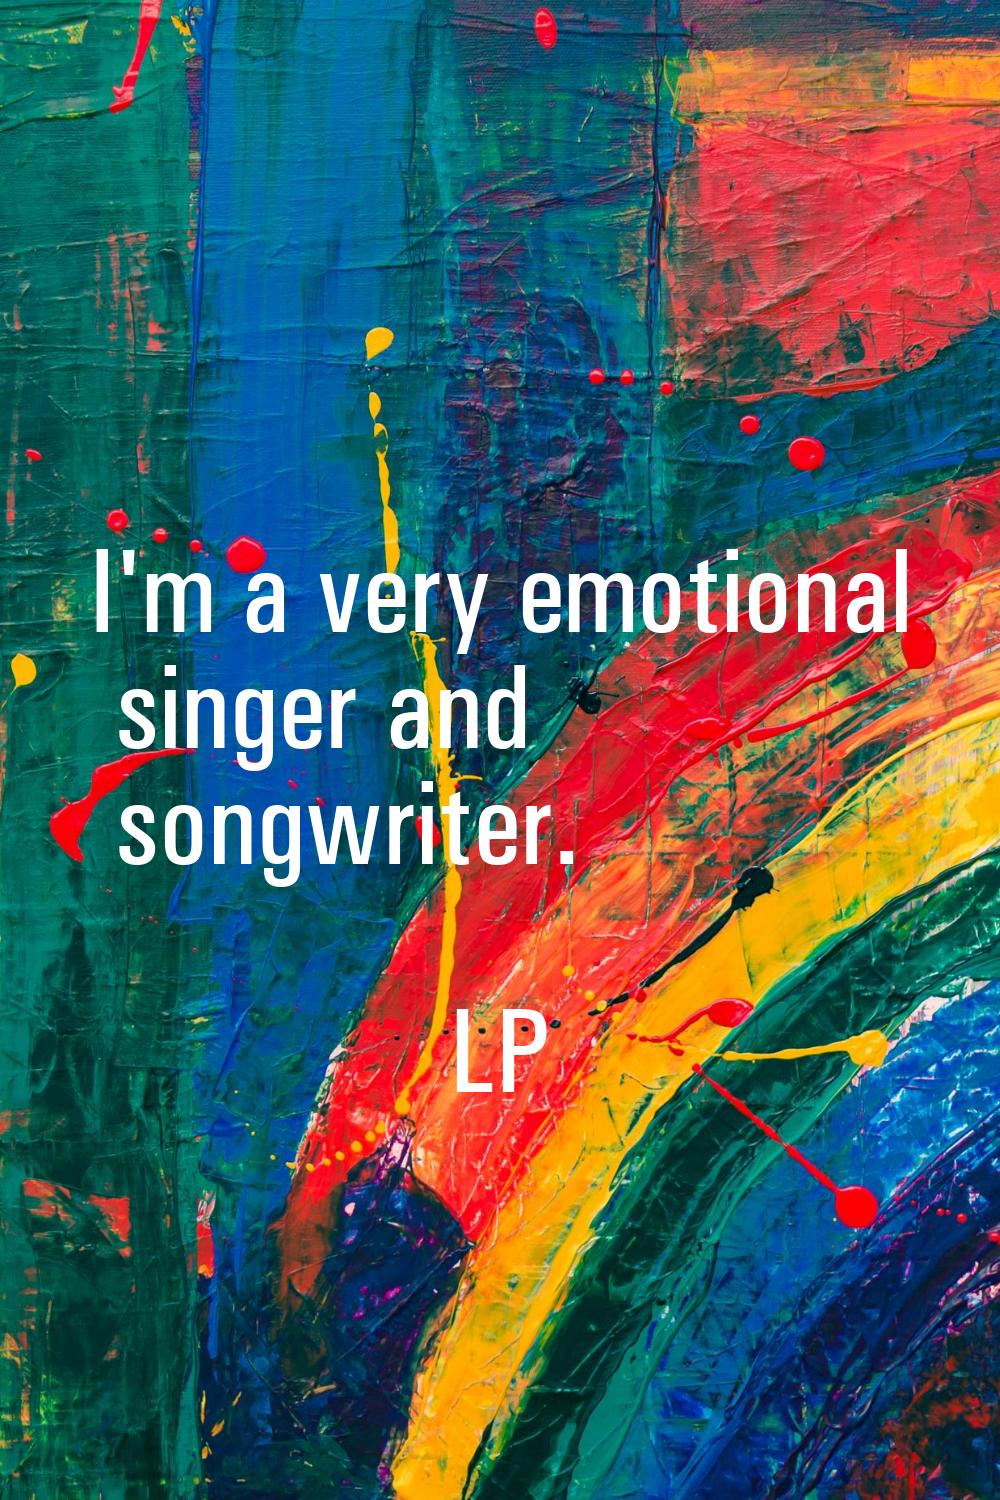 I'm a very emotional singer and songwriter.